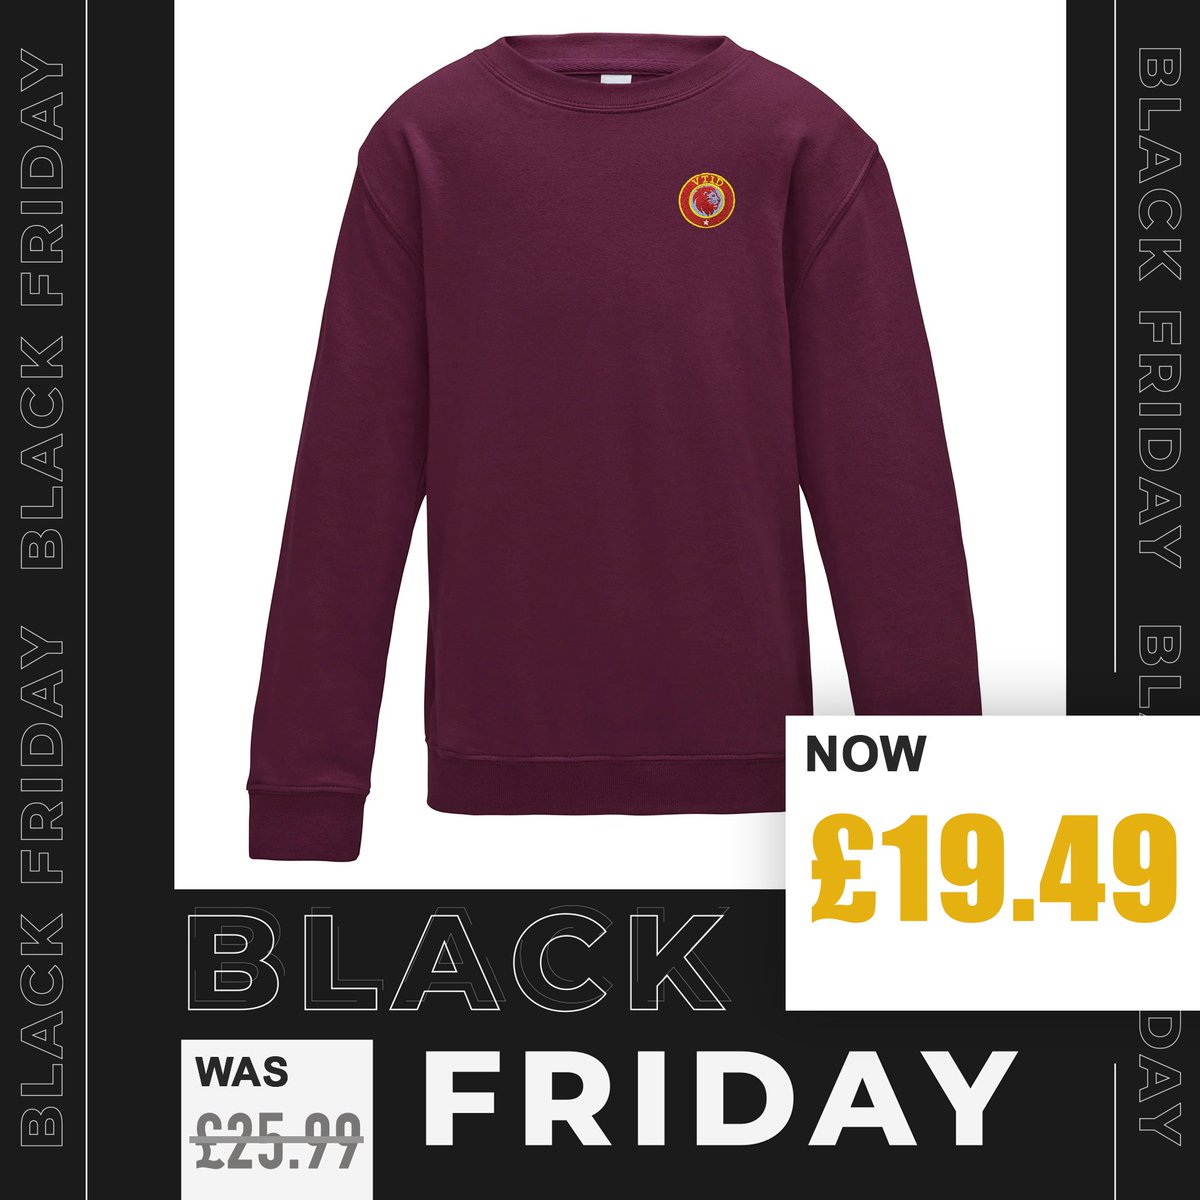 🚨 NEW WEEK, NEW BLACK FRIDAY DEALS 🚨 Get 25% off our smartly embroidered kids sweatshirts 🔥 Multiple colours ✅ Sizes range from ages 3-13 ✅ Shop now 👉 villatillidie.com/sale #AVFC